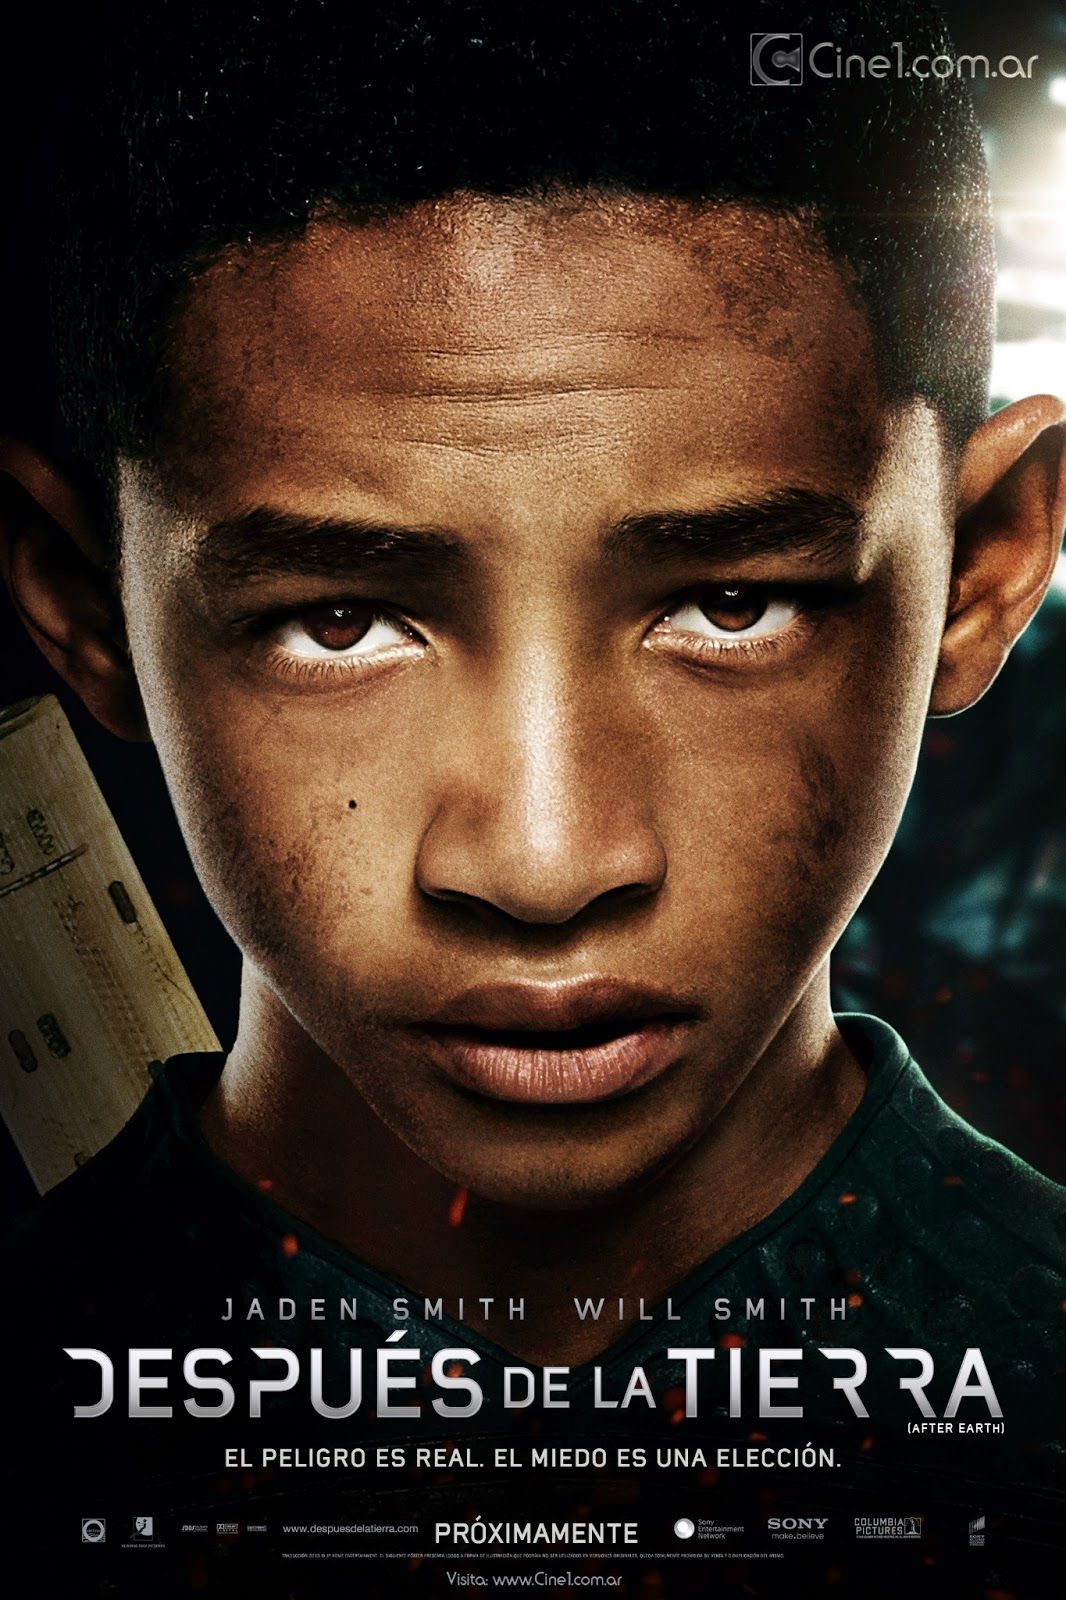 After Earth International Poster 2